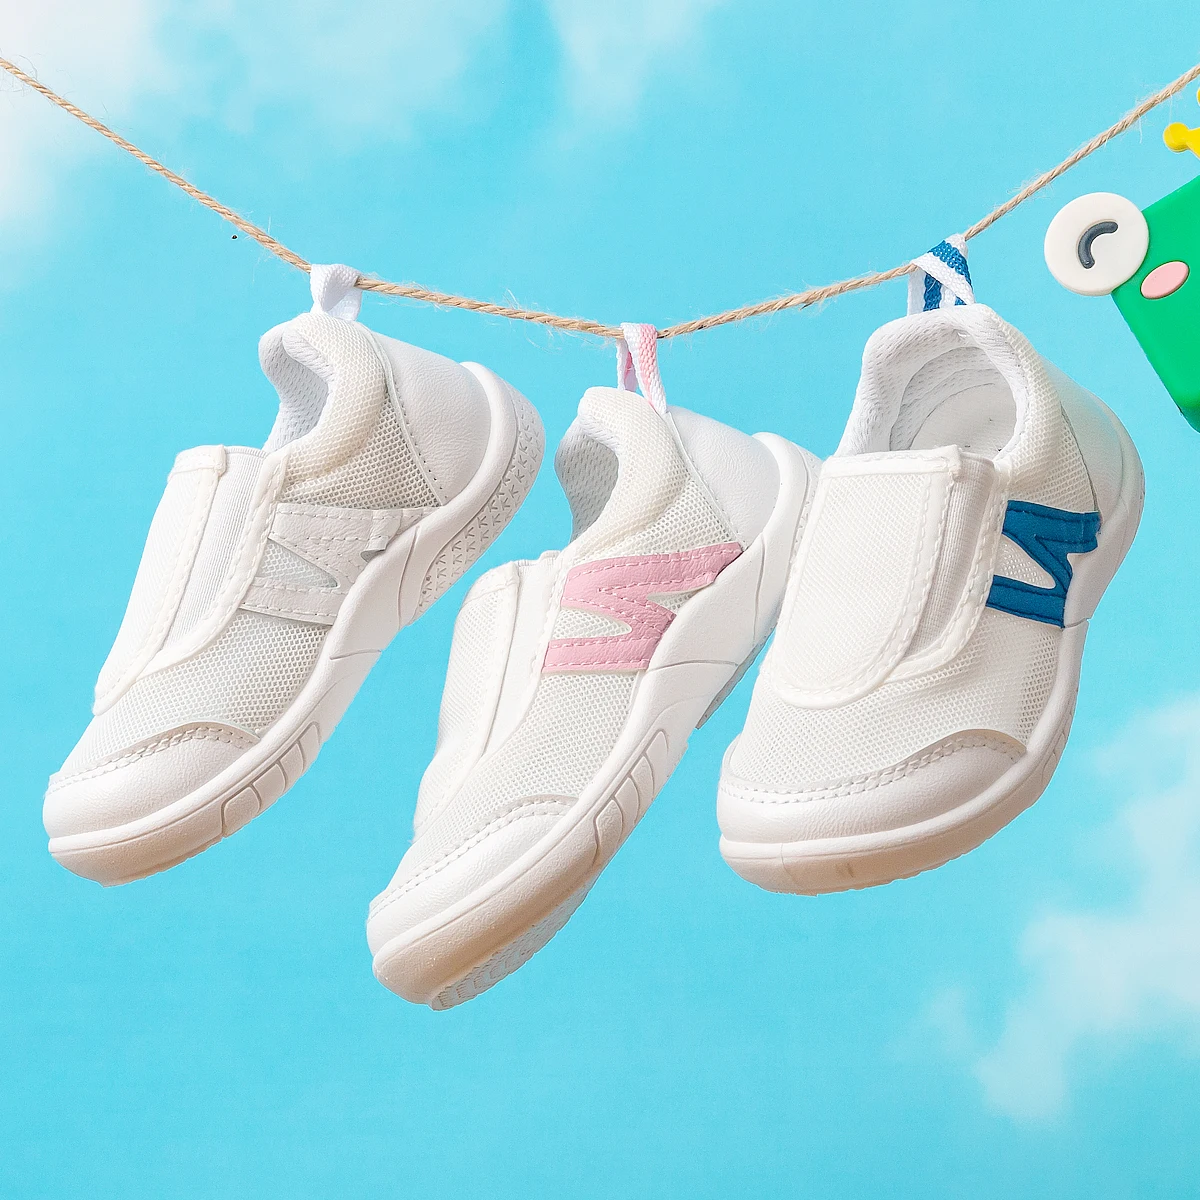 baby-crib-flat-casual-shoes-for-toddlers-children-newborn-infant-boy-girls-summer-white-sneakers-sports-kids-first-walkers-2021